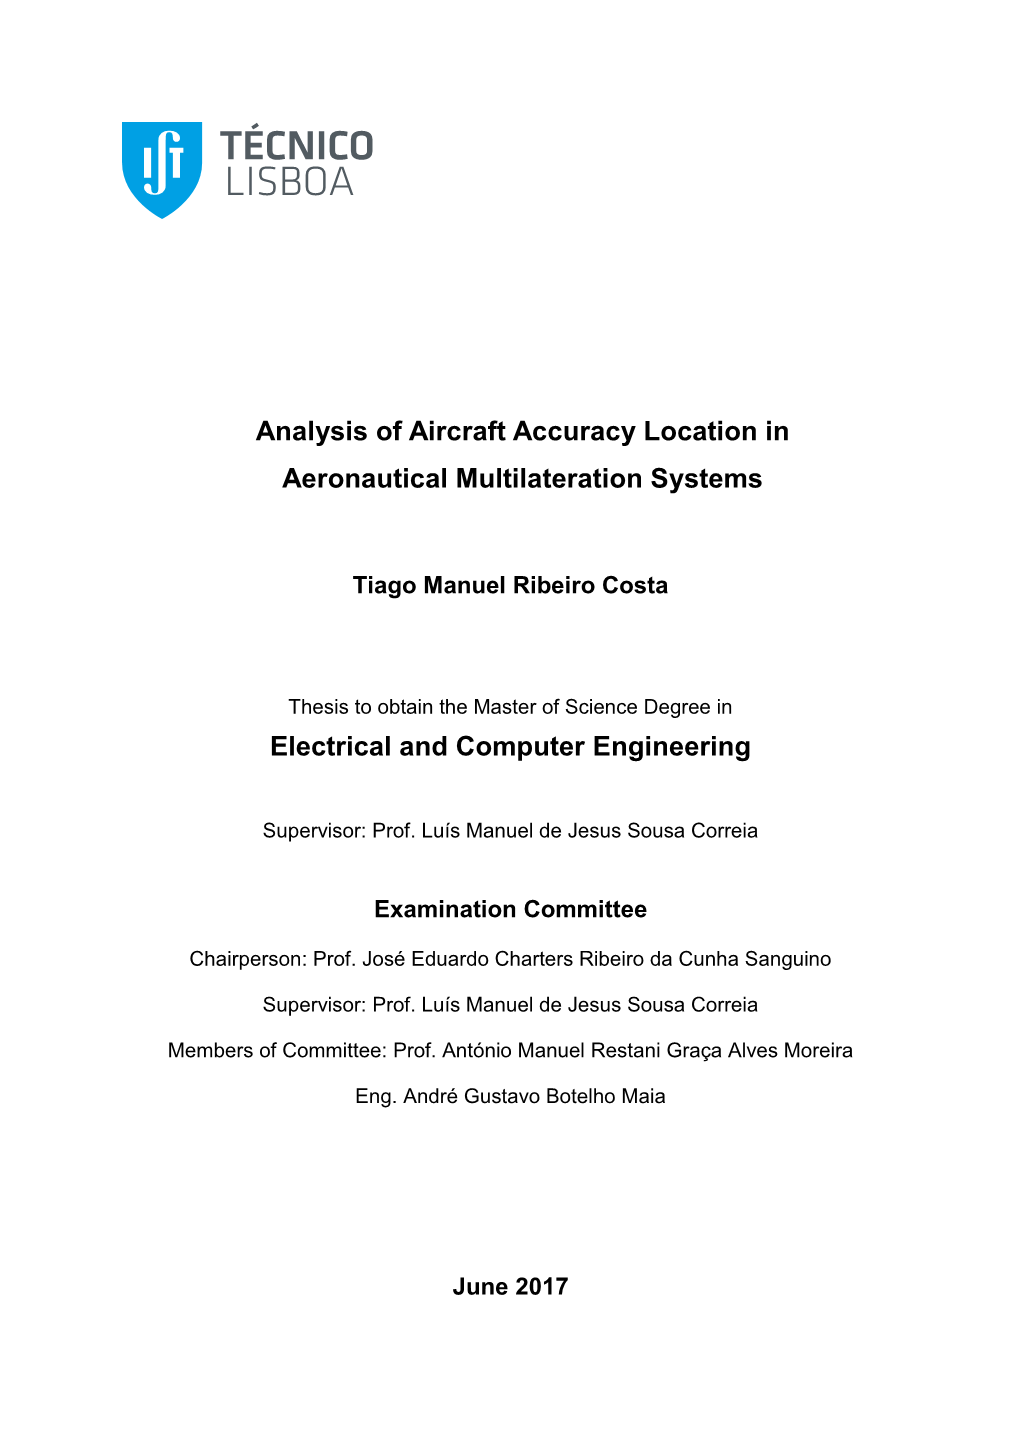 Analysis of Aircraft Accuracy Location in Aeronautical Multilateration Systems